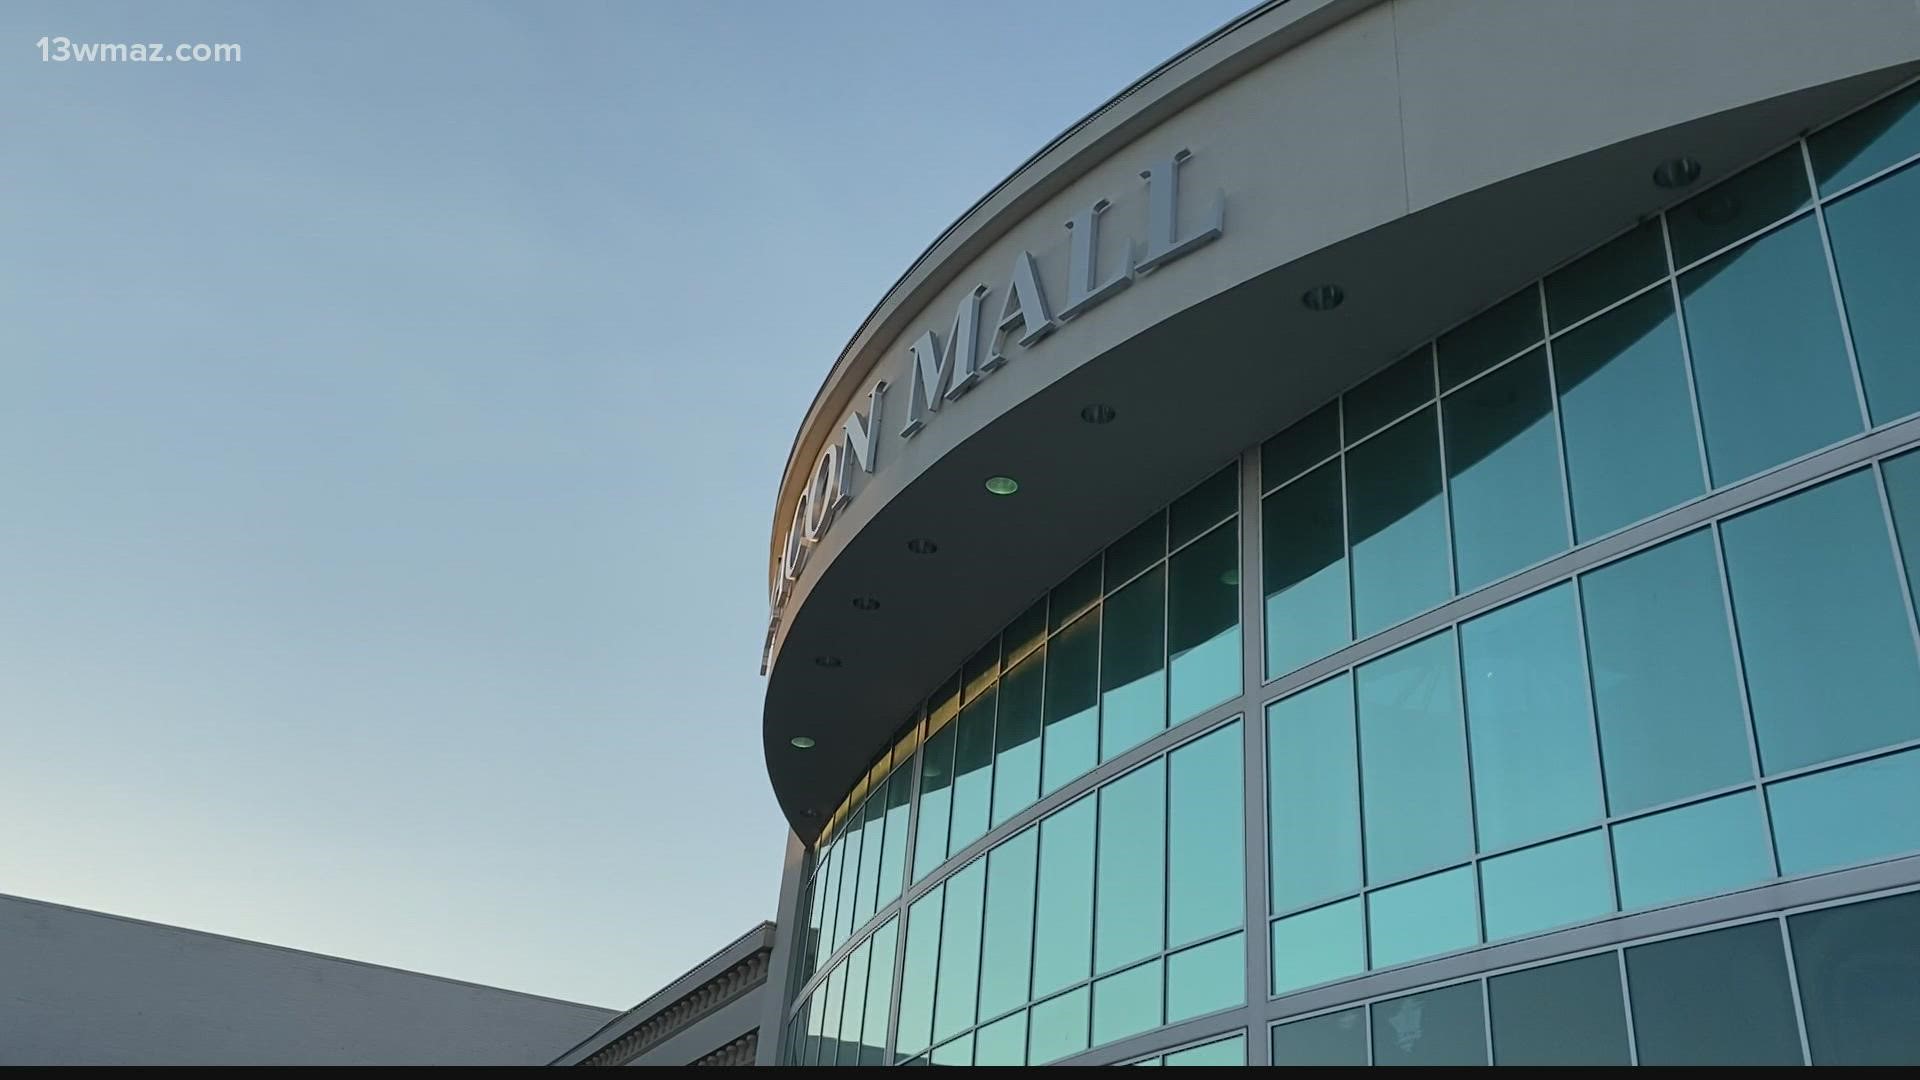 There's a lot of buzz about the new projects to update the Macon Mall. One of the most talked-about is the amphitheater county leaders broke ground on last week.